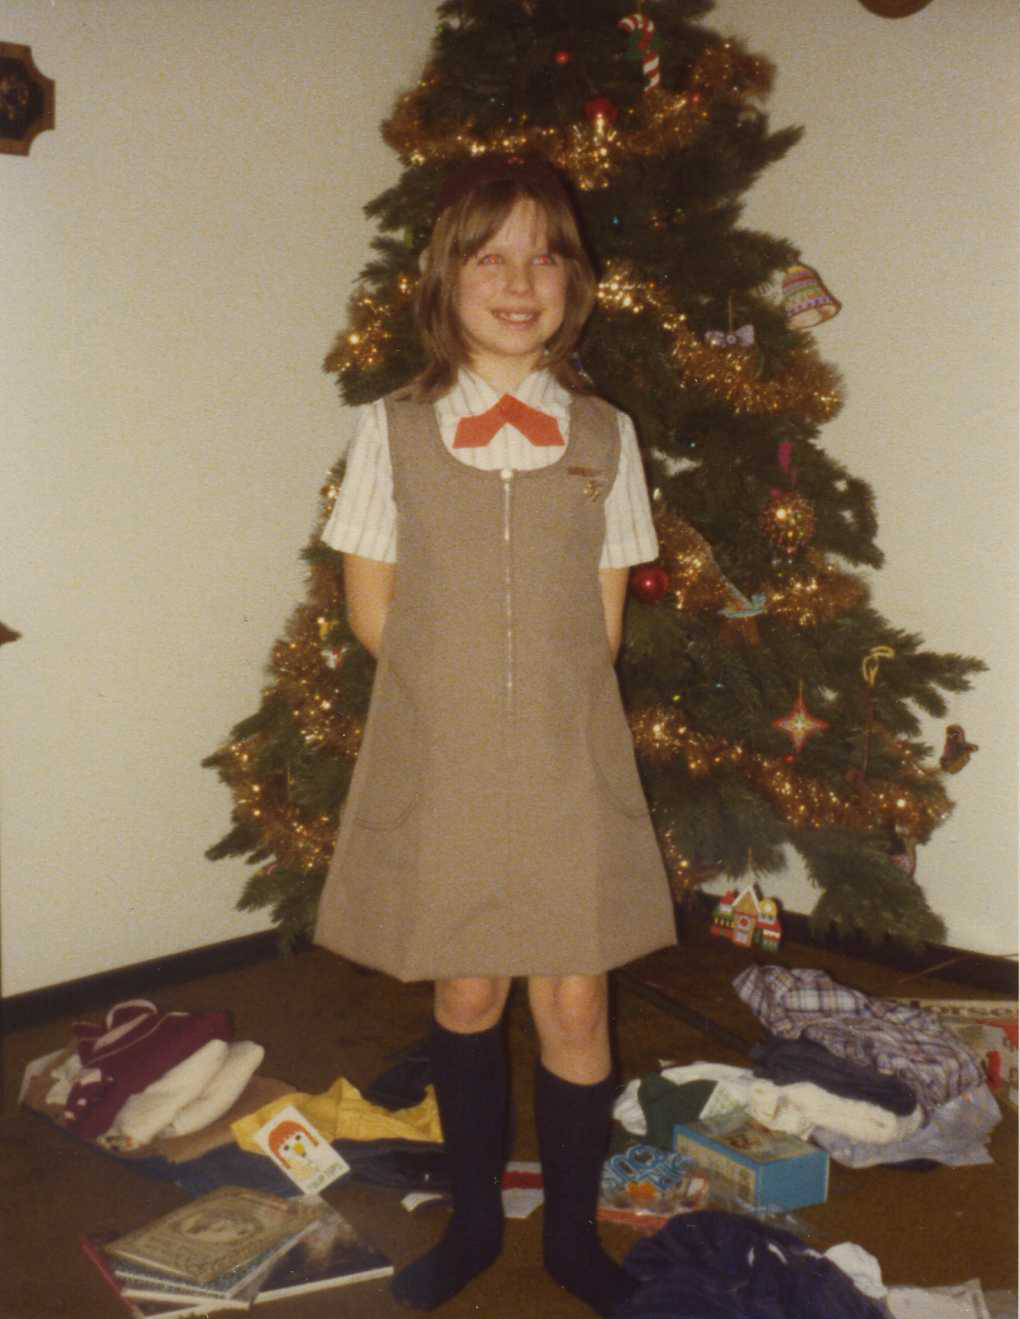 Me in my Brownie uniform, which I loved. It meant I belonged, but I'm not sure you'd swoon that a brown jumper is pretty.